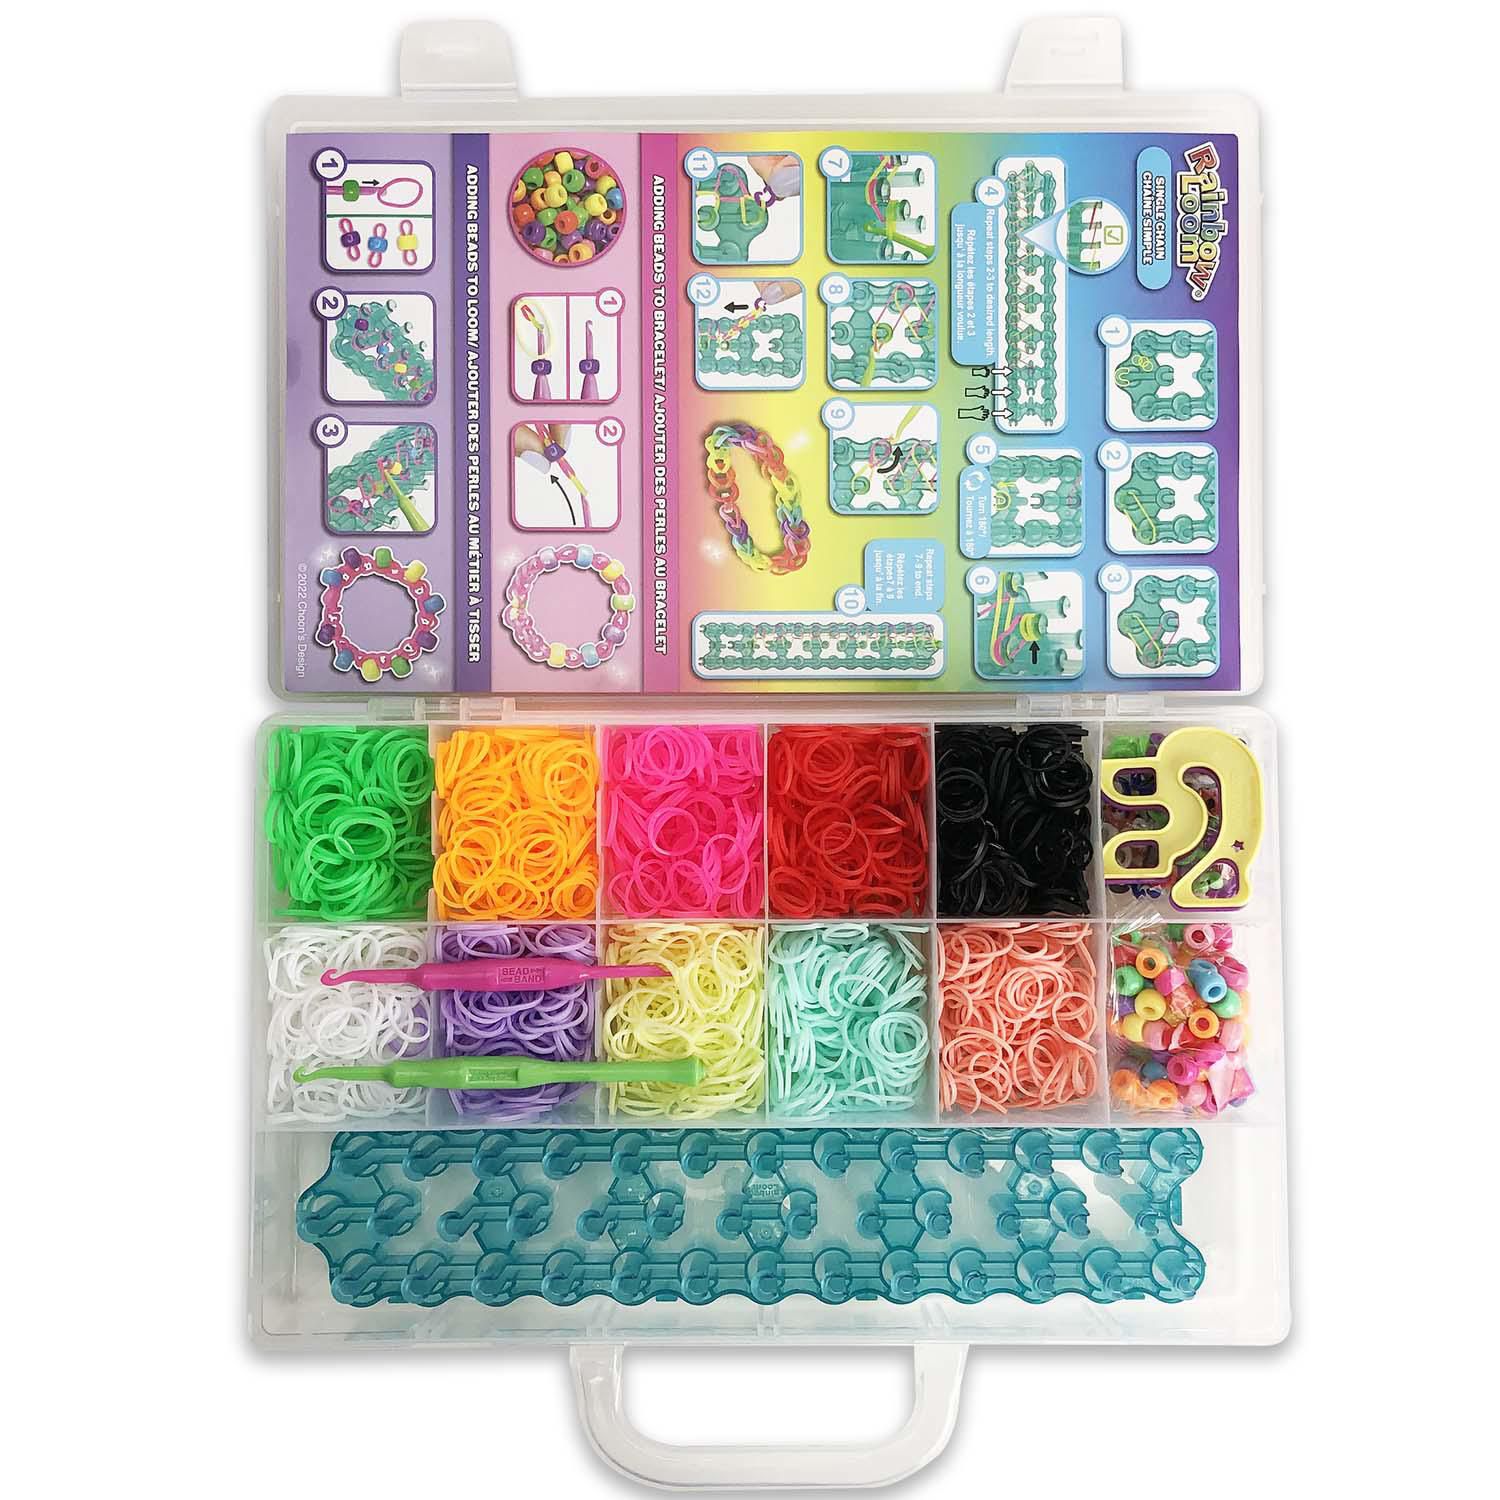 The Rainbow Loom and the Lost Art of Making Stuff | www.splicetoday.com